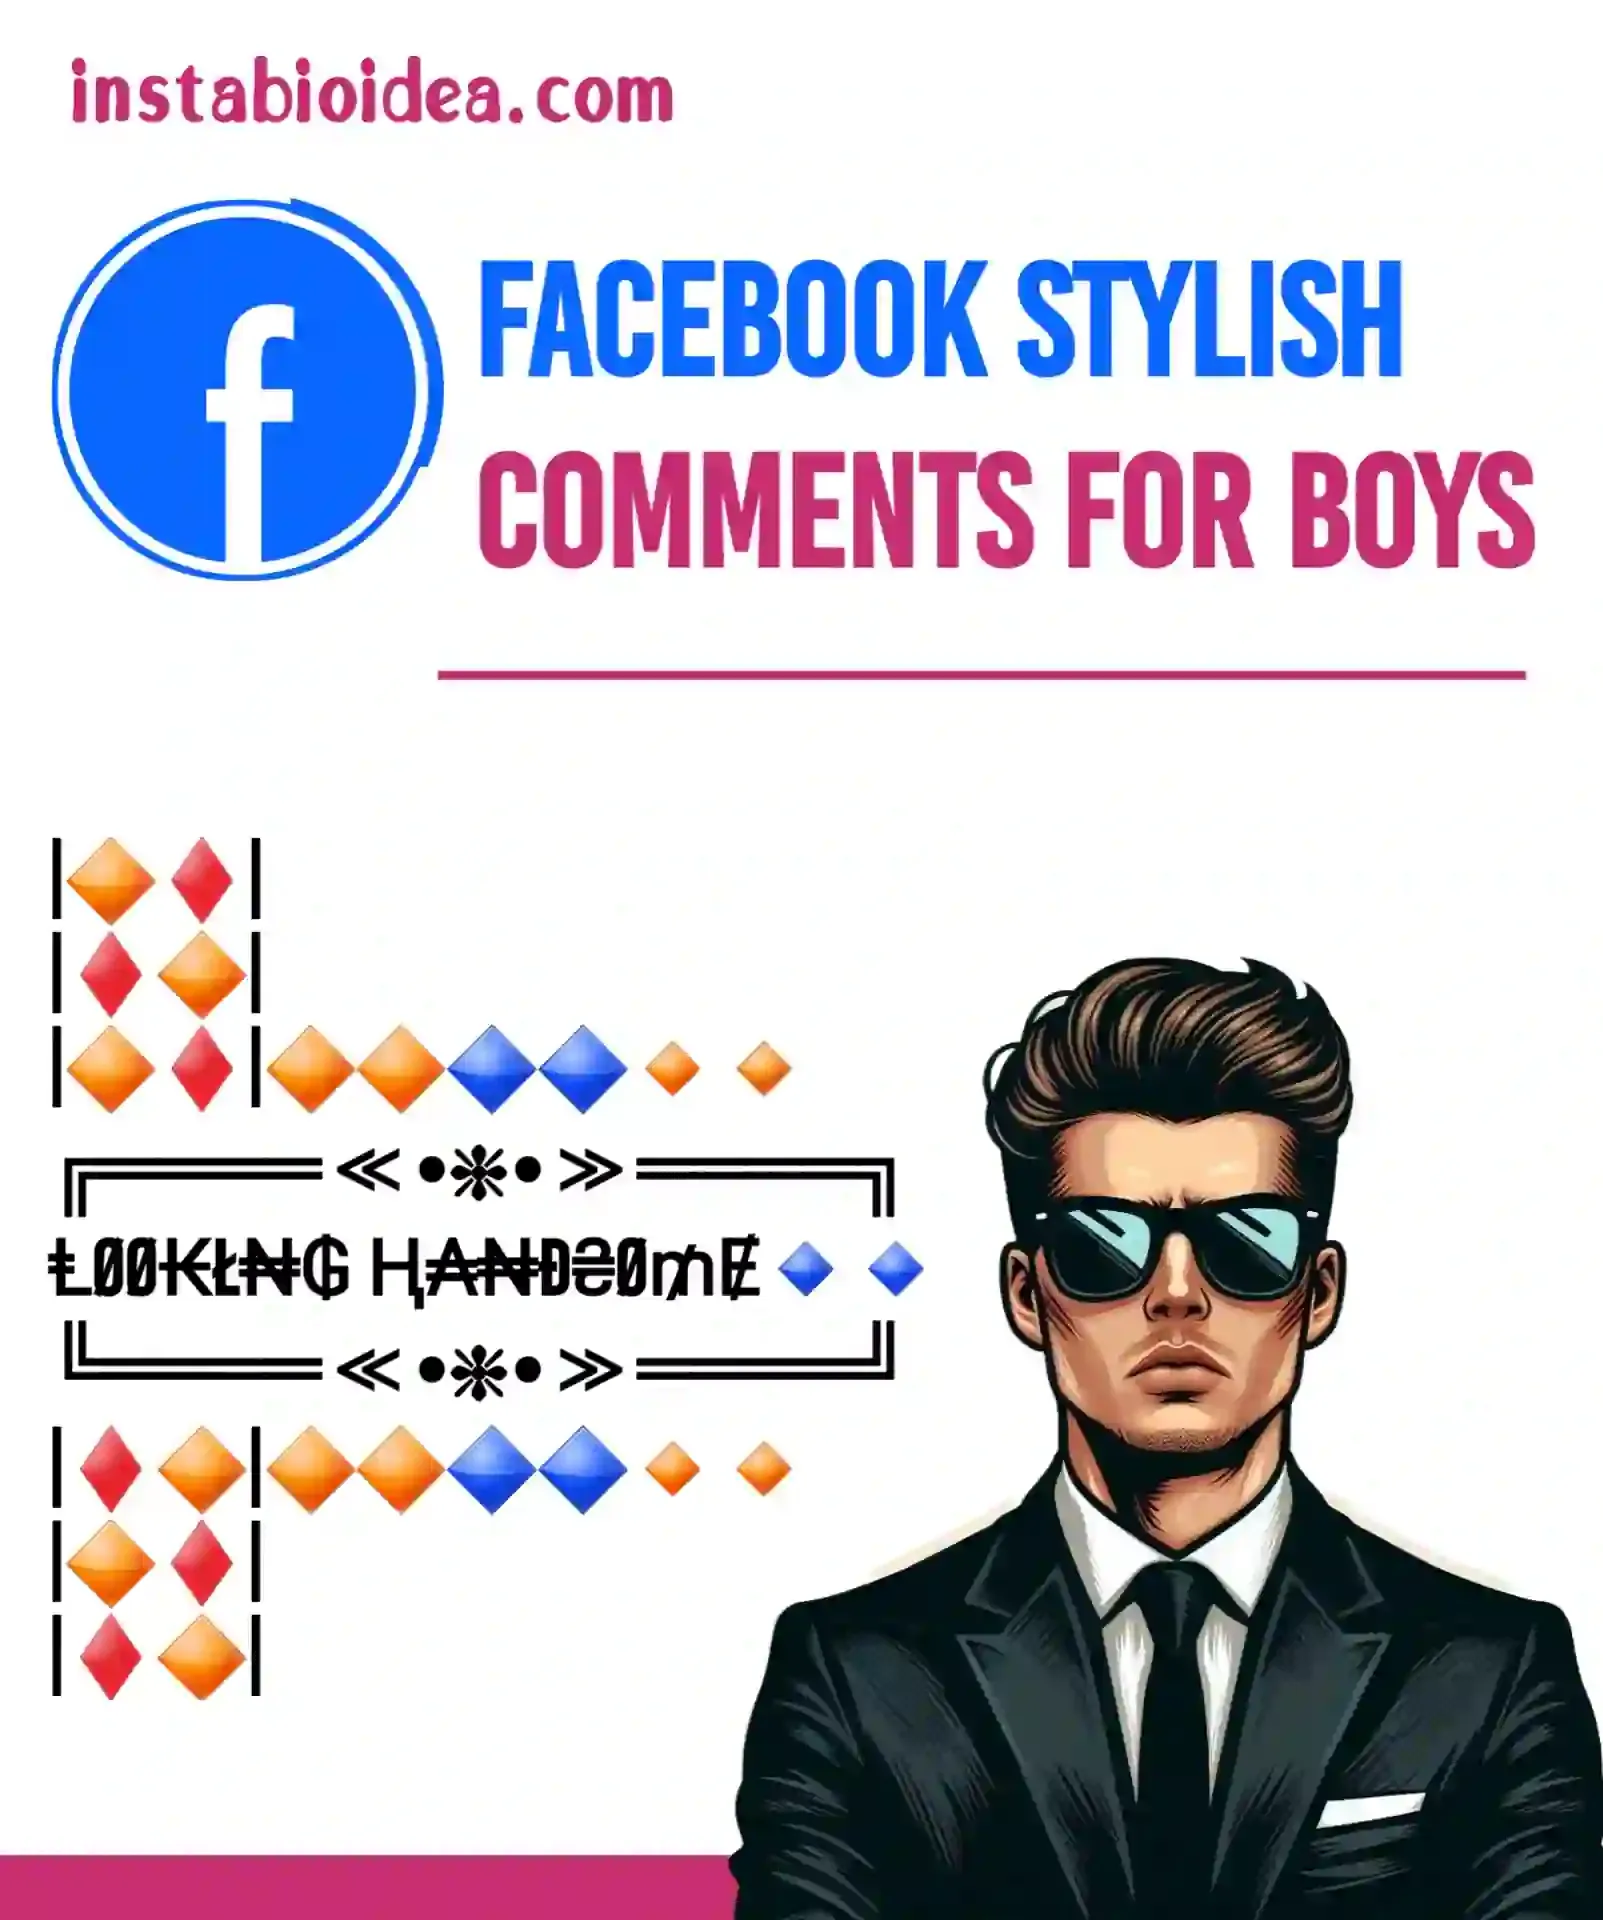 facebook stylish comments for boys image